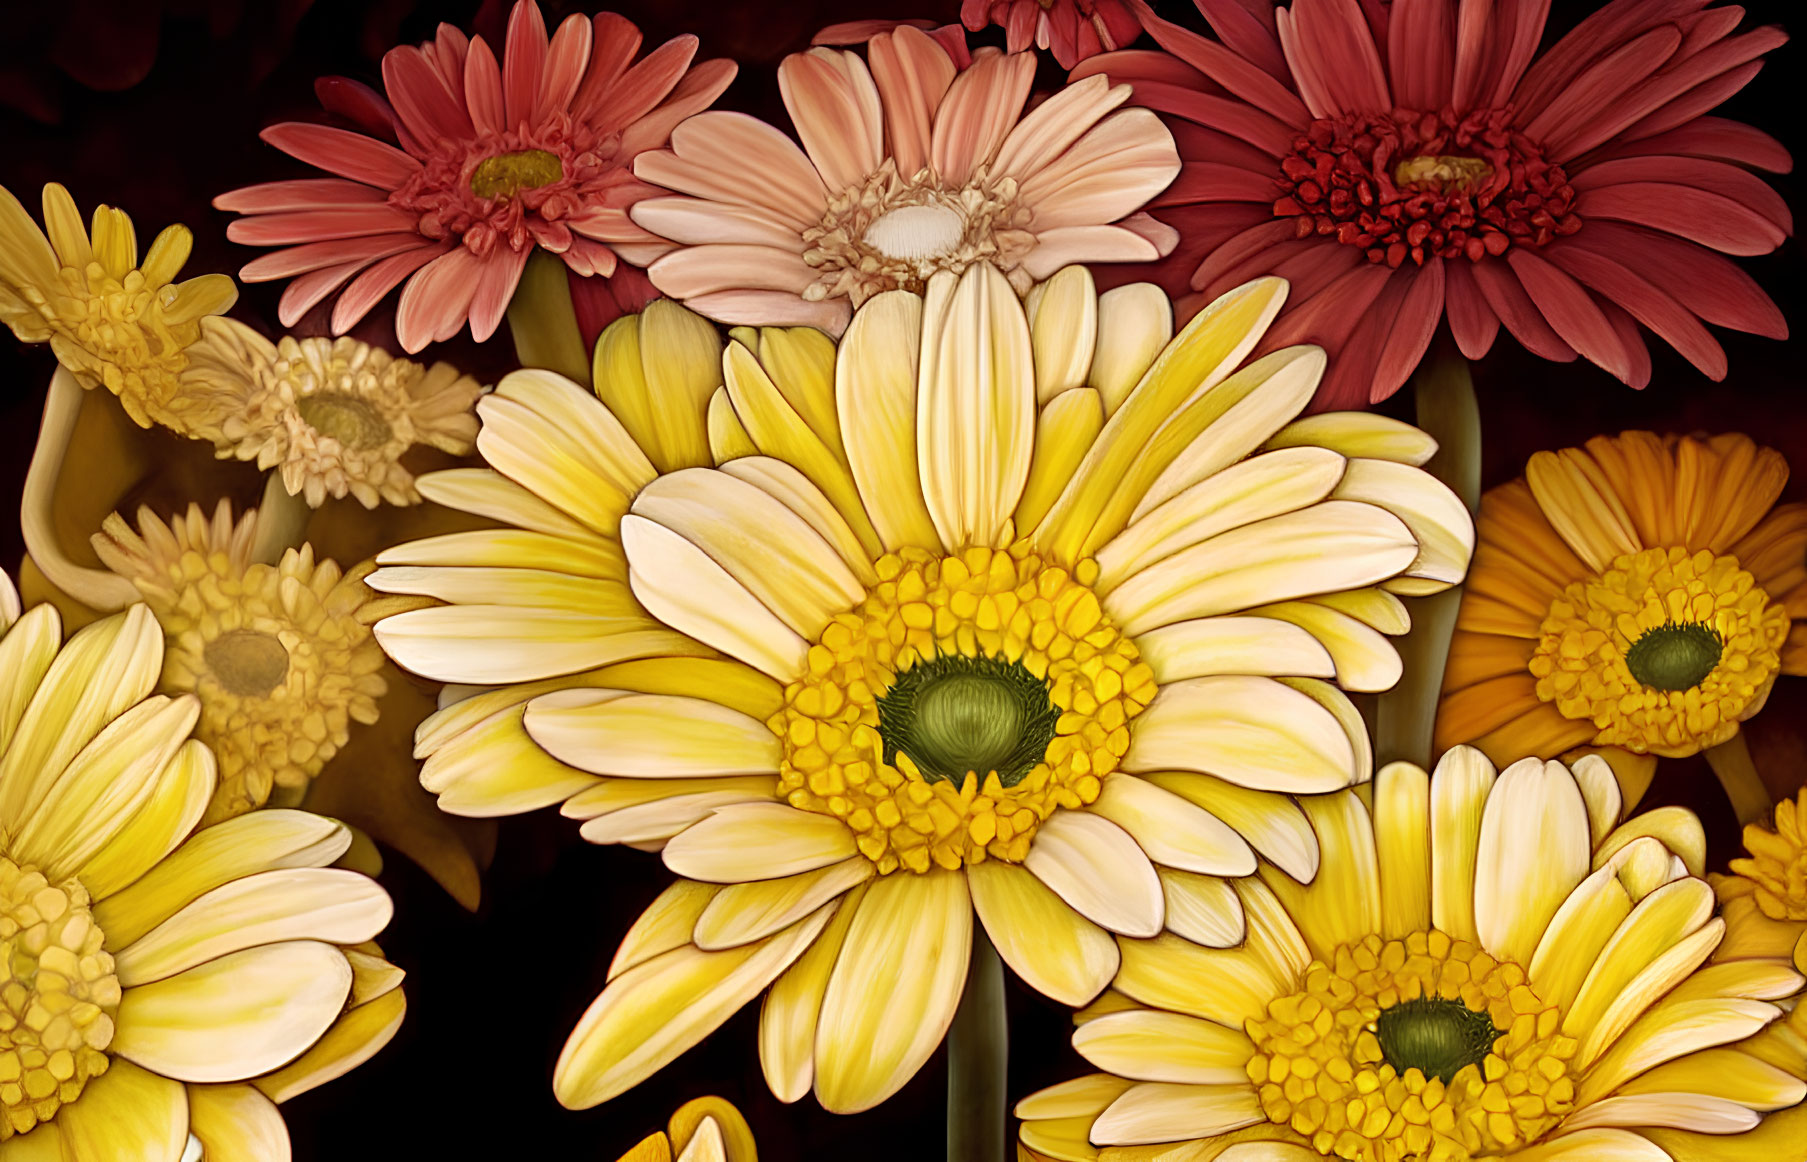 Vibrant Gerbera Daisies in Pink, Cream, and Yellow on Dark Background